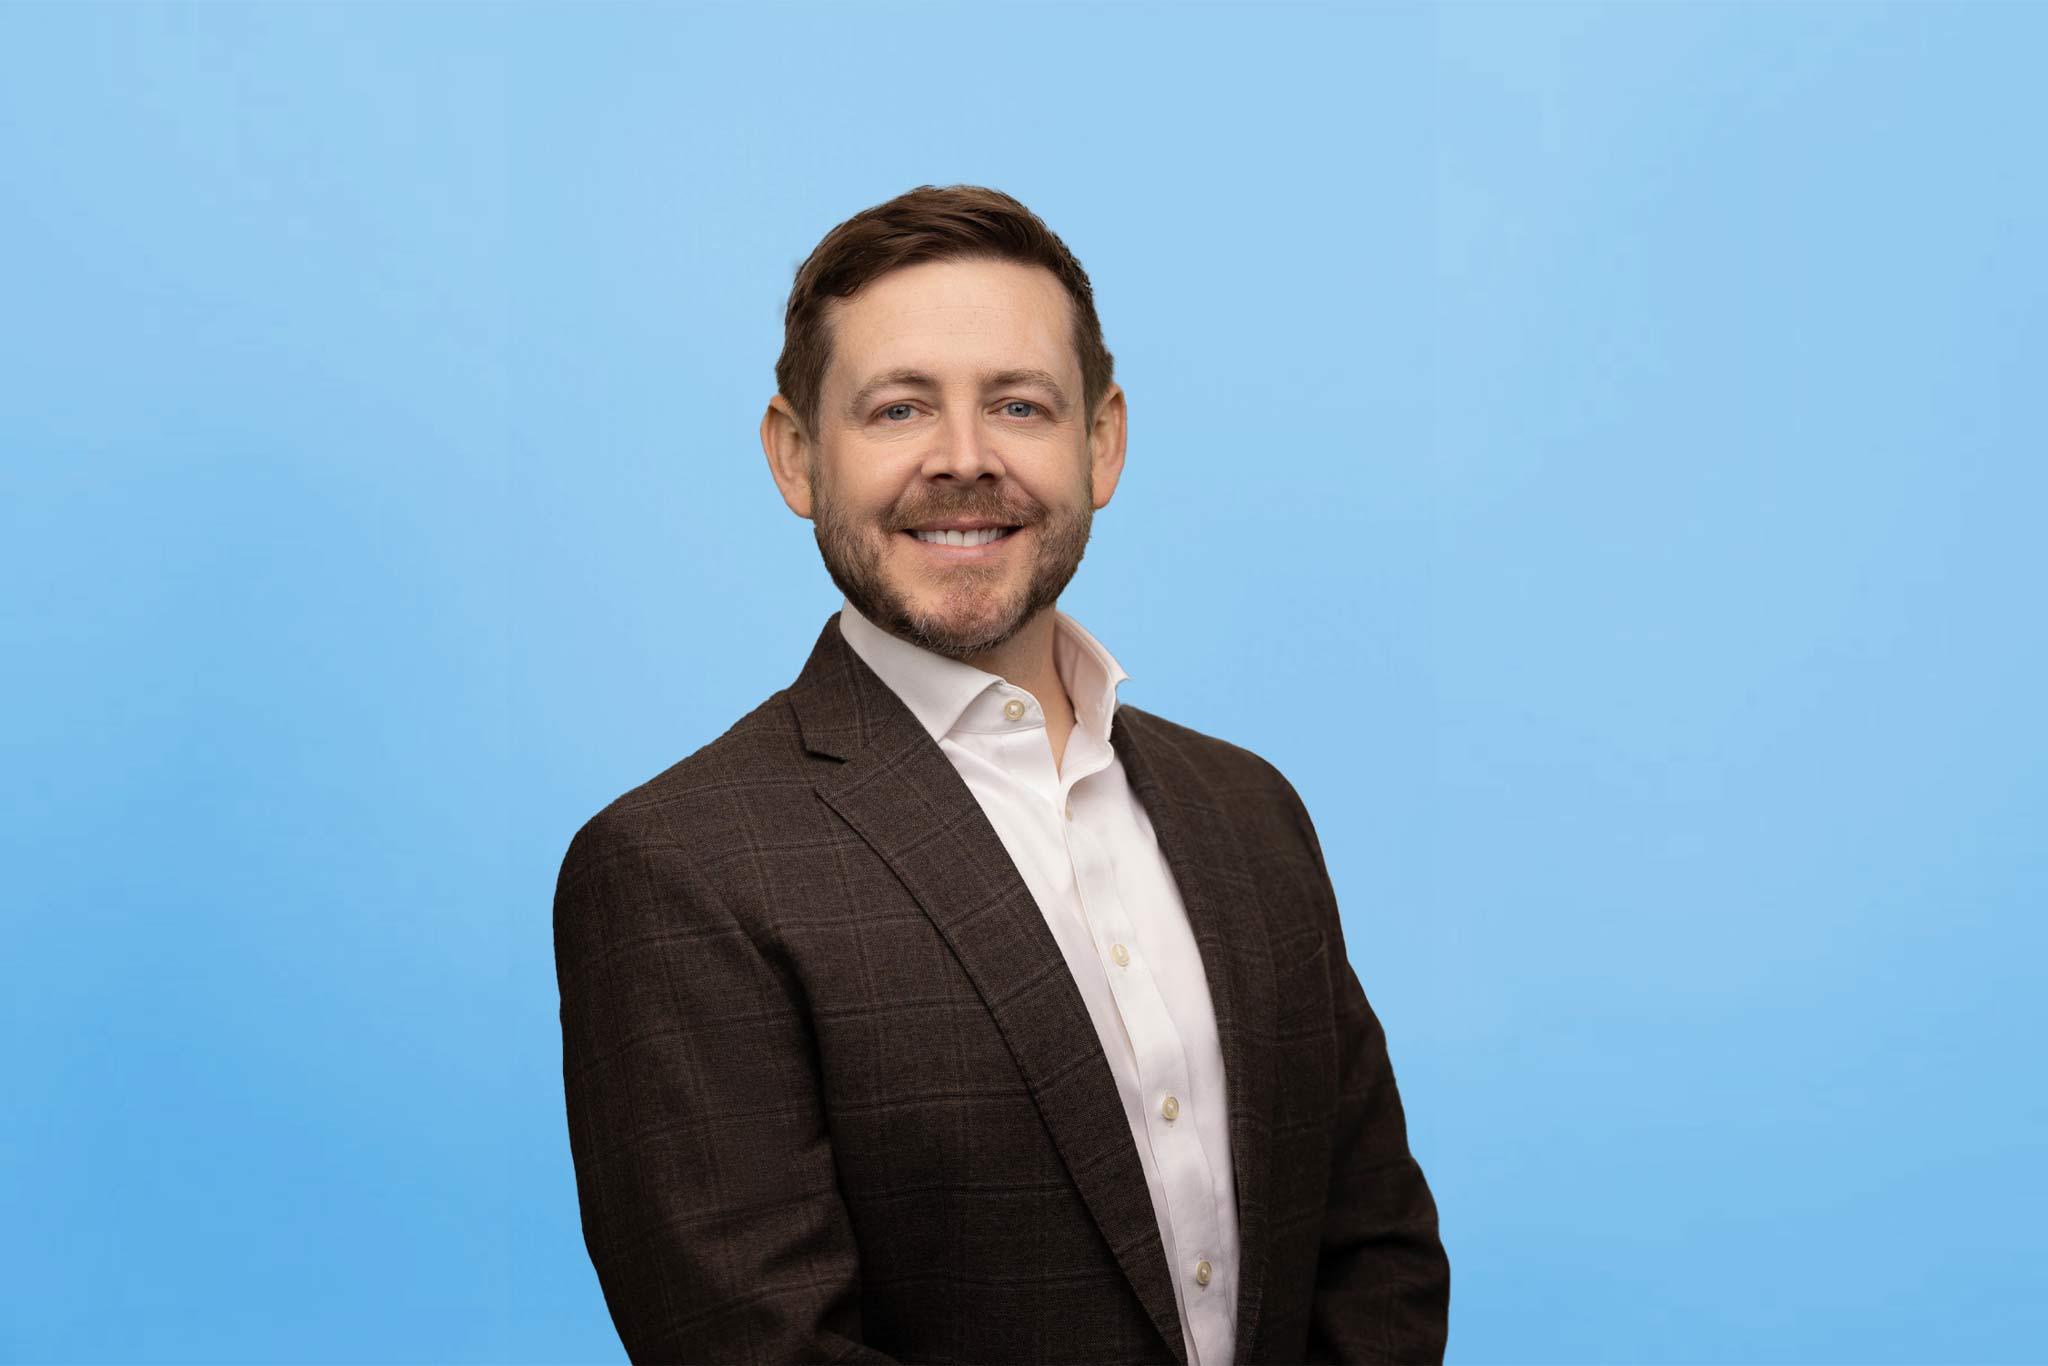 Professional headshot of Dr. Kevin Burgdorf against a blue background, highlighting his friendly and approachable demeanor.